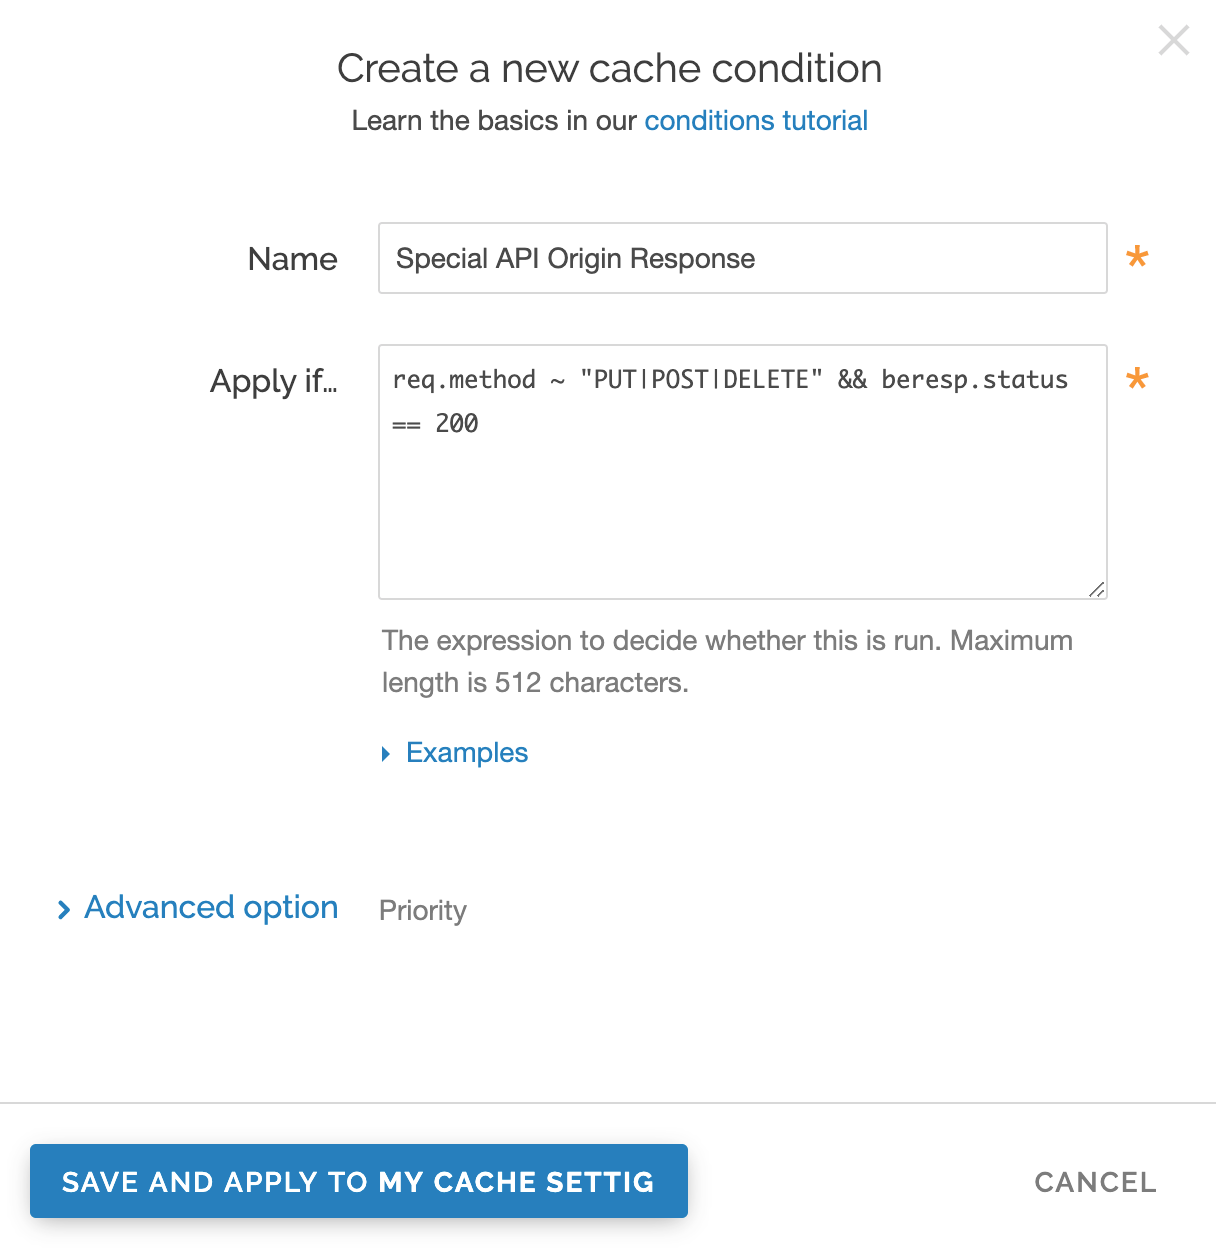 the new condition window that ensures the cache settings only apply when responses come from the special API